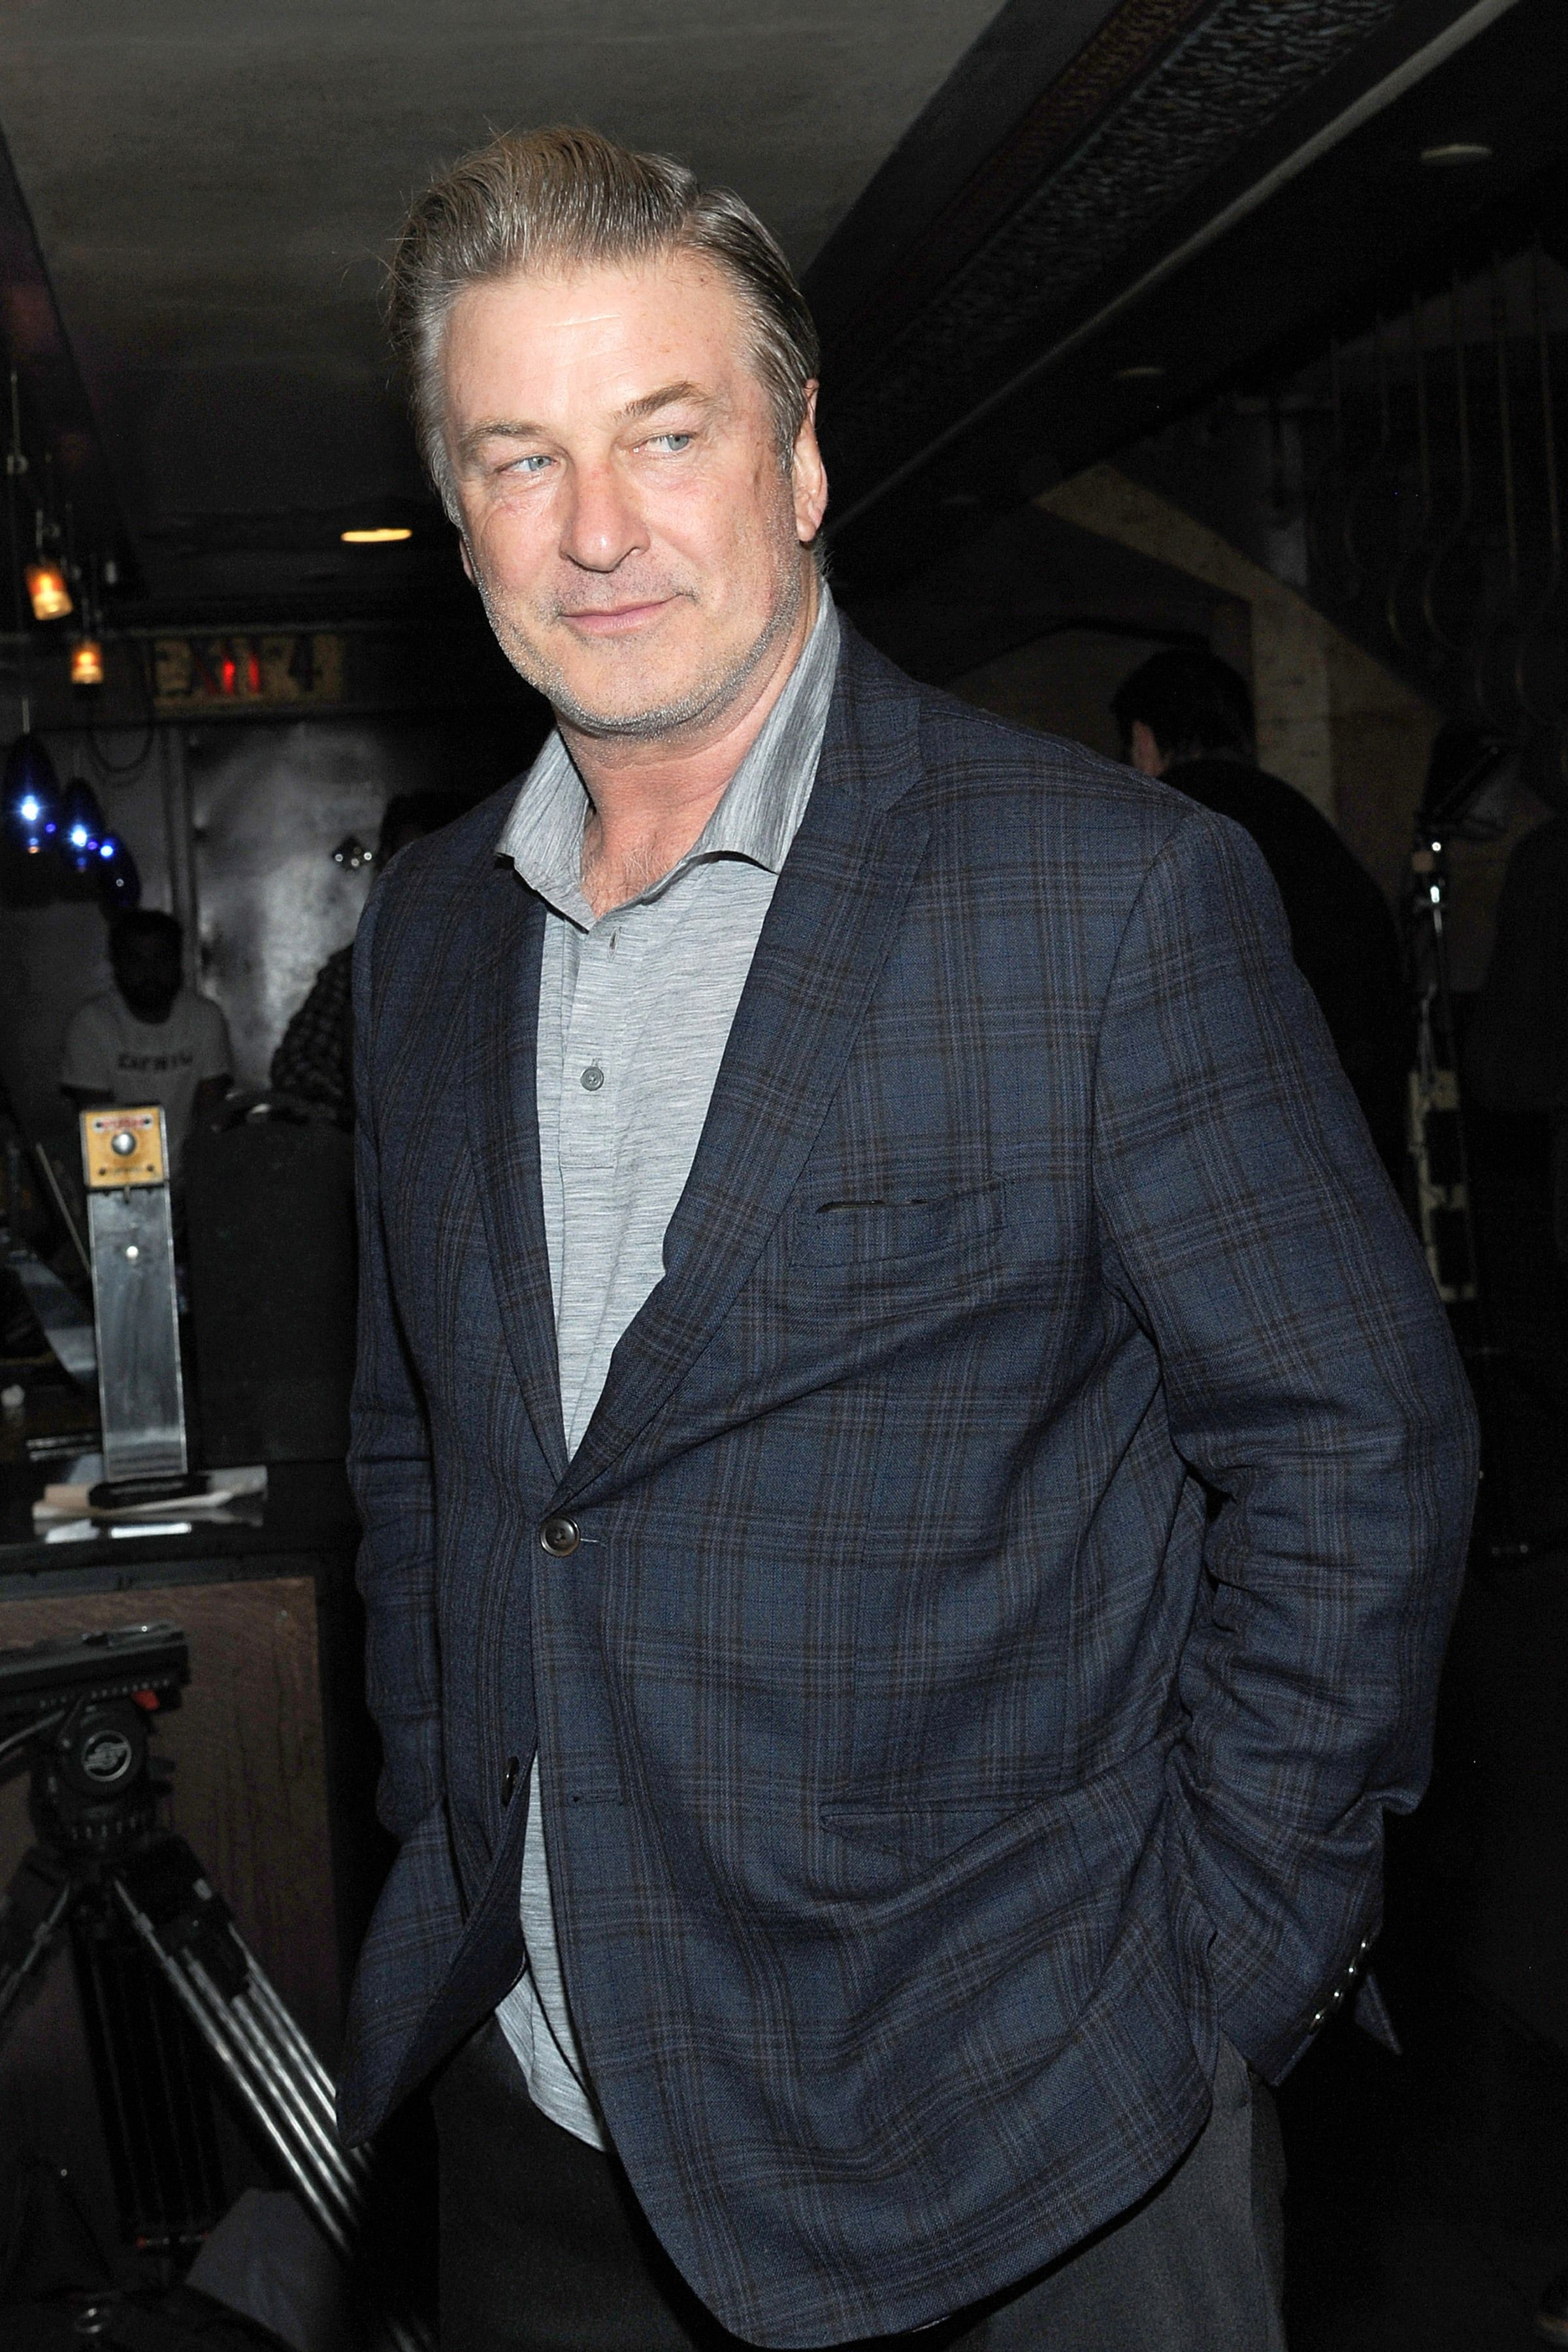 Alec Baldwin out on the town